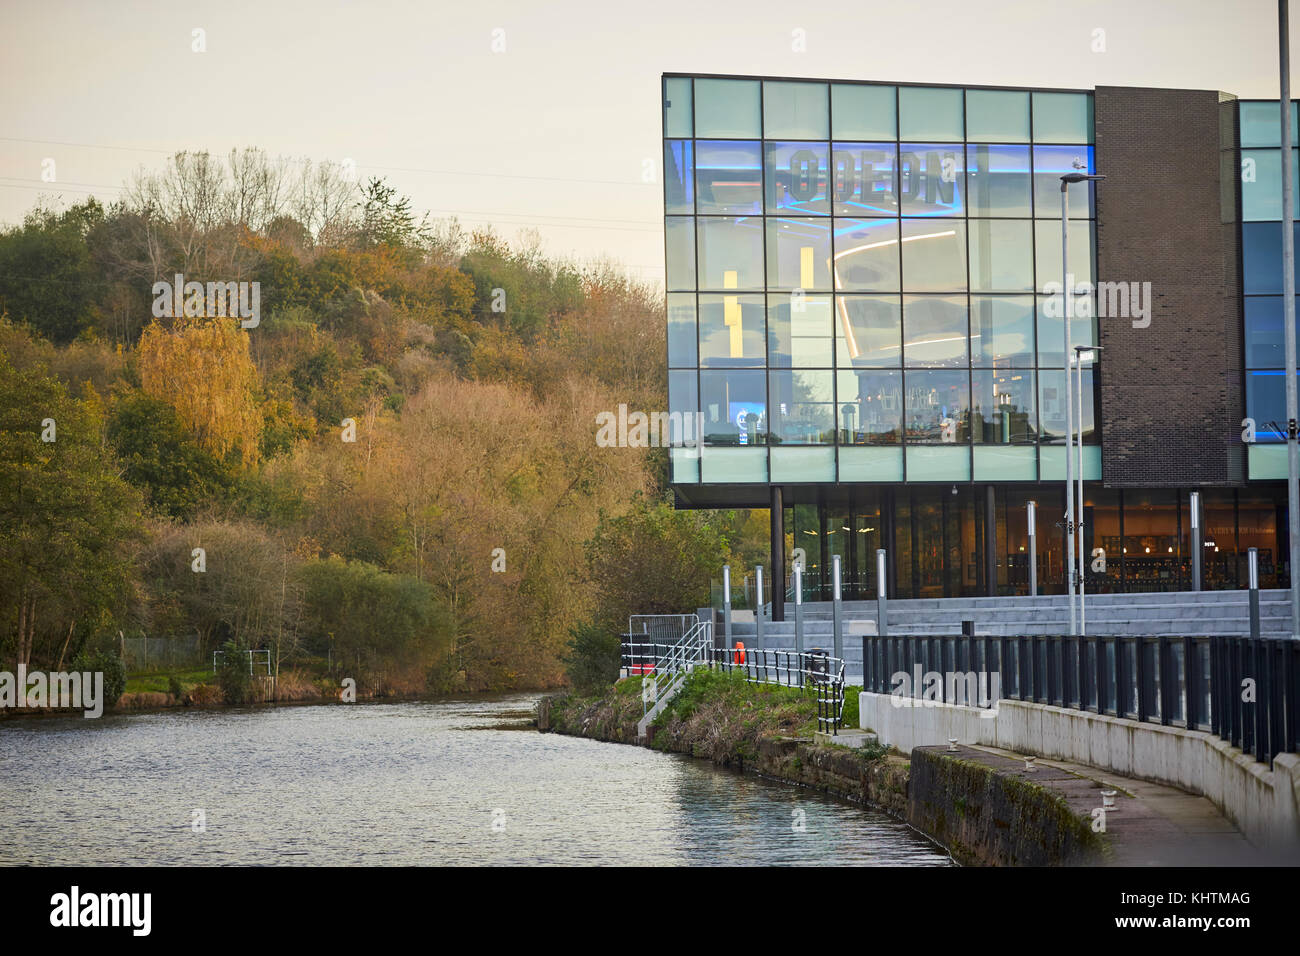 Northwich Barons Quay development of shops, restaurants and an Odeon Cinema with The River Weaver in Northwhich, Cheshire Stock Photo